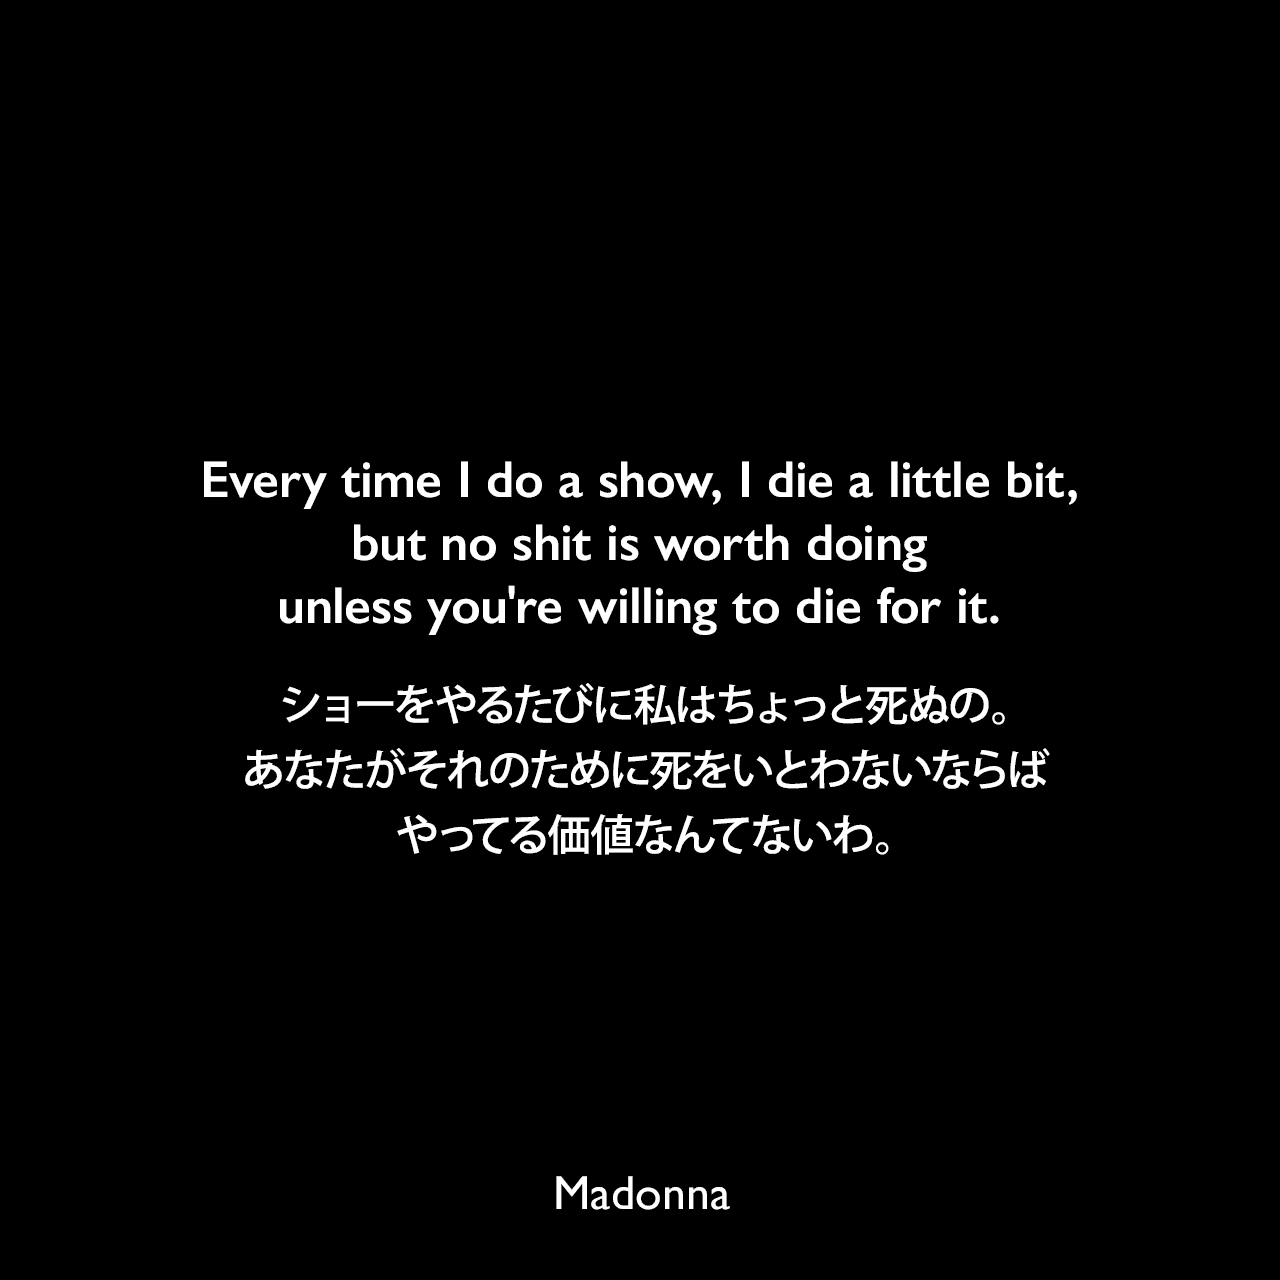 Every time I do a show, I die a little bit, but no shit is worth doing unless you're willing to die for it.ショーをやるたびに私はちょっと死ぬの。あなたがそれのために死をいとわないならば、やってる価値なんてないわ。- Guy Osearyによる本「Madonna Confessions book」よりMadonna